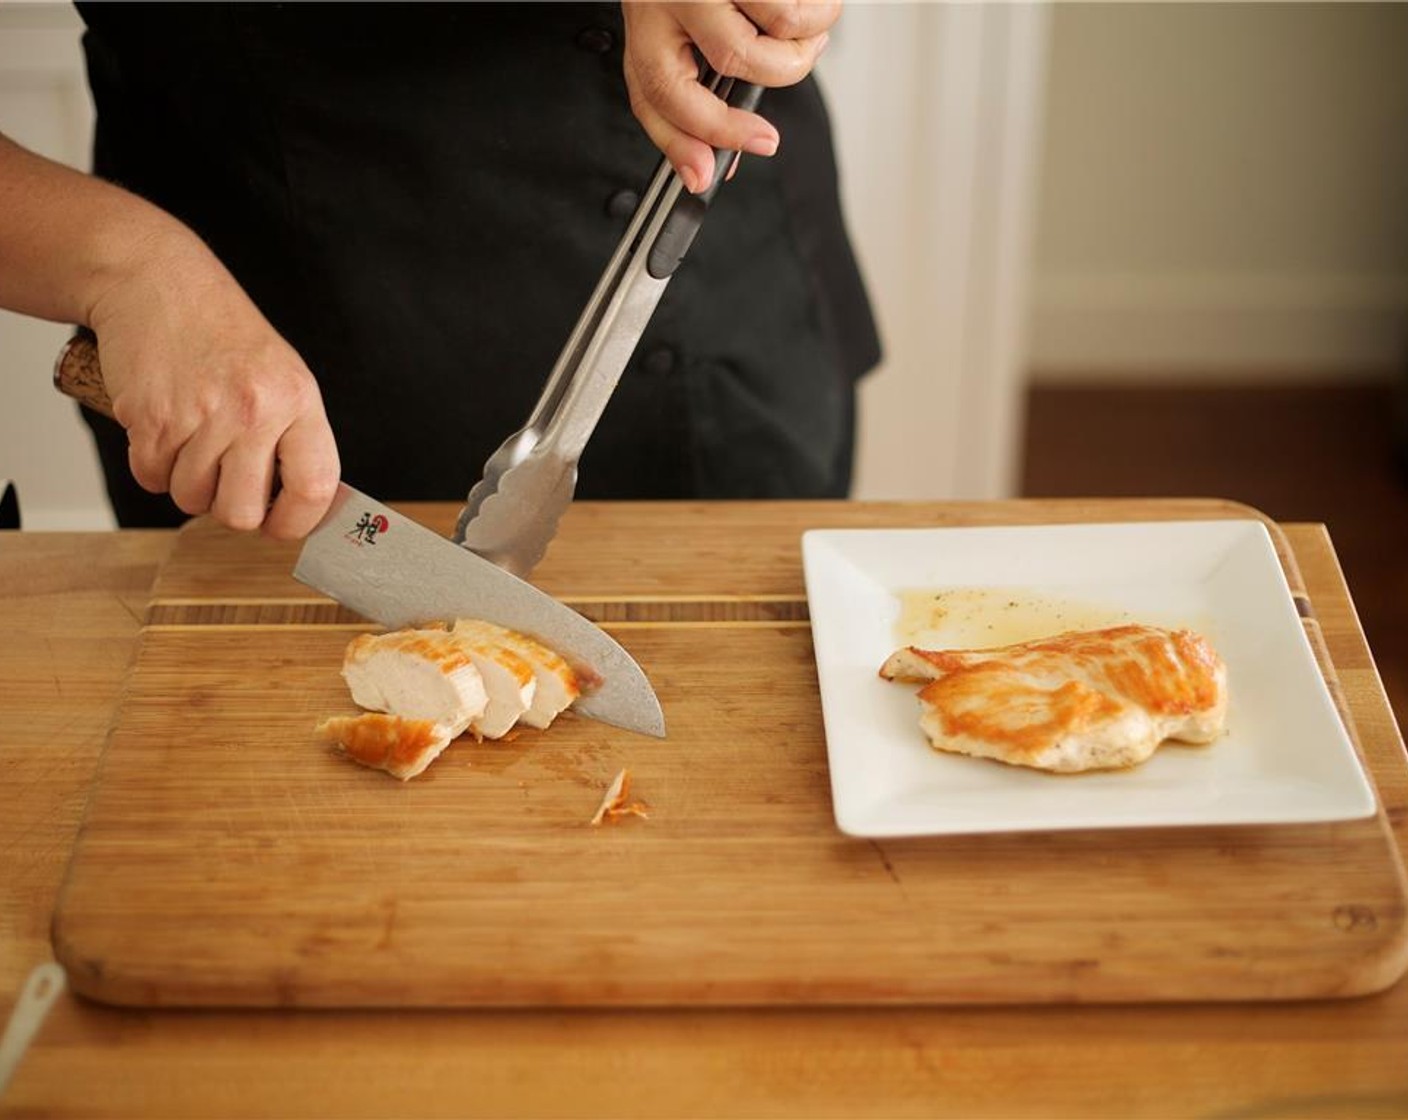 step 10 Slice the chicken ¼" thick at a 45-degree angle. This is called a “bias” cut. Transfer one sliced chicken breast to each plate and fan the chicken across bottom rim of plate. Drizzle chicken drippings from plate over sliced chicken.